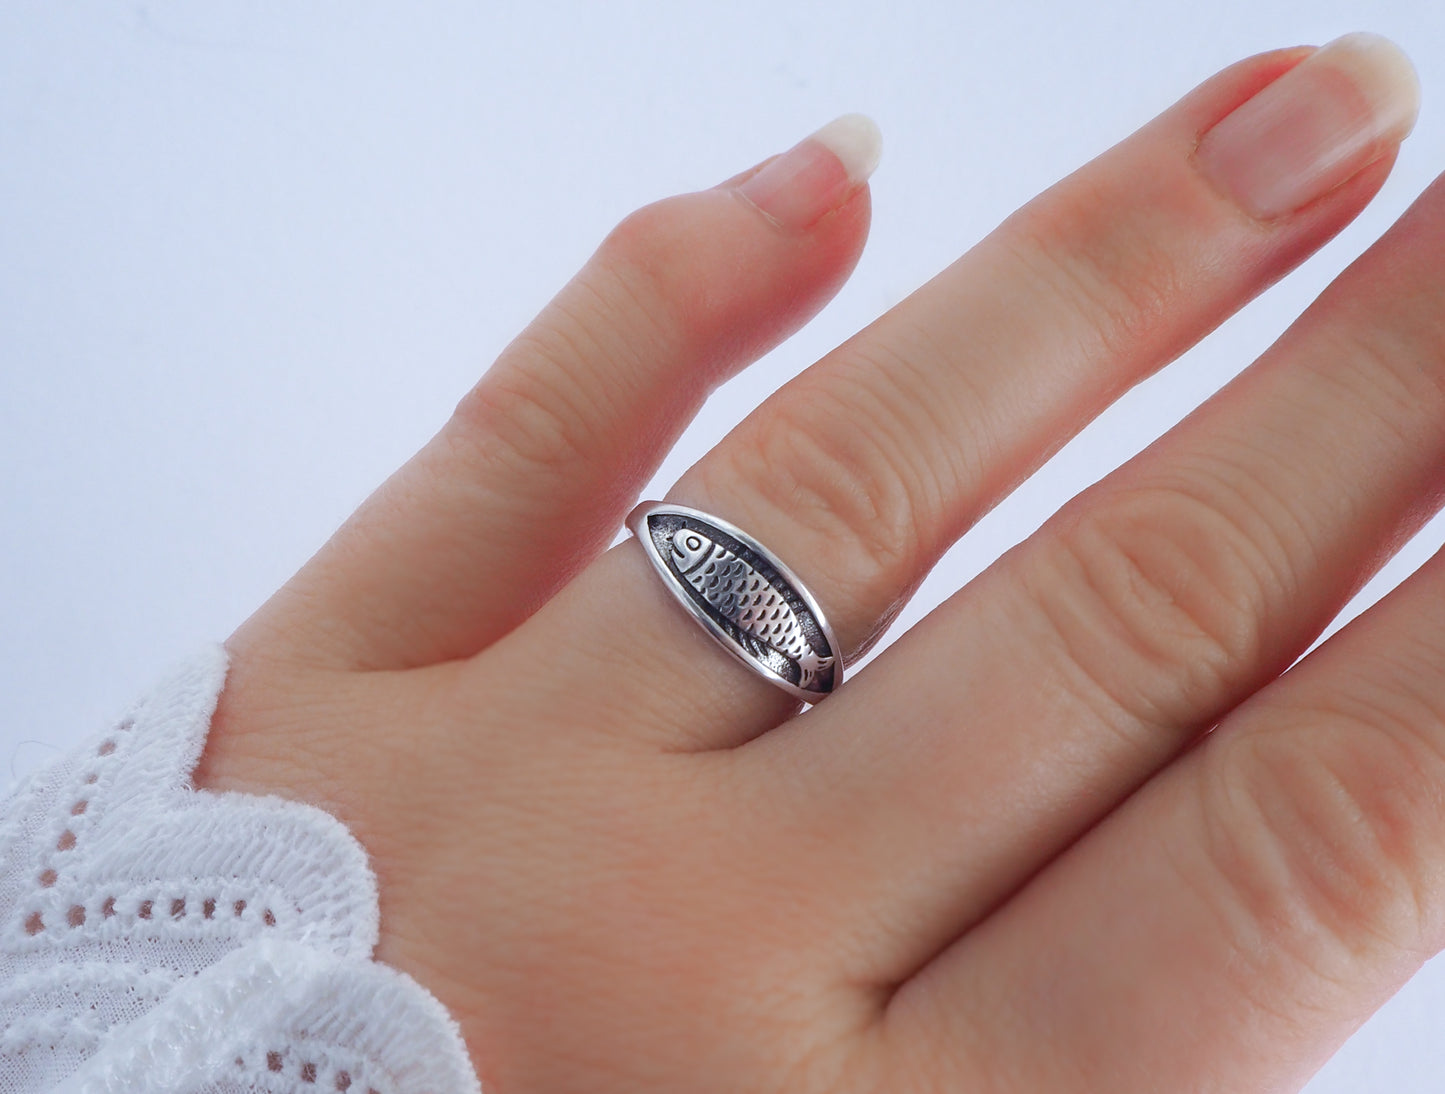 Sardine Fish Ring made with 925 Sterling silver on finger, Sardine jewelry from Portugal, Coastal style, Minimalistic jewelry